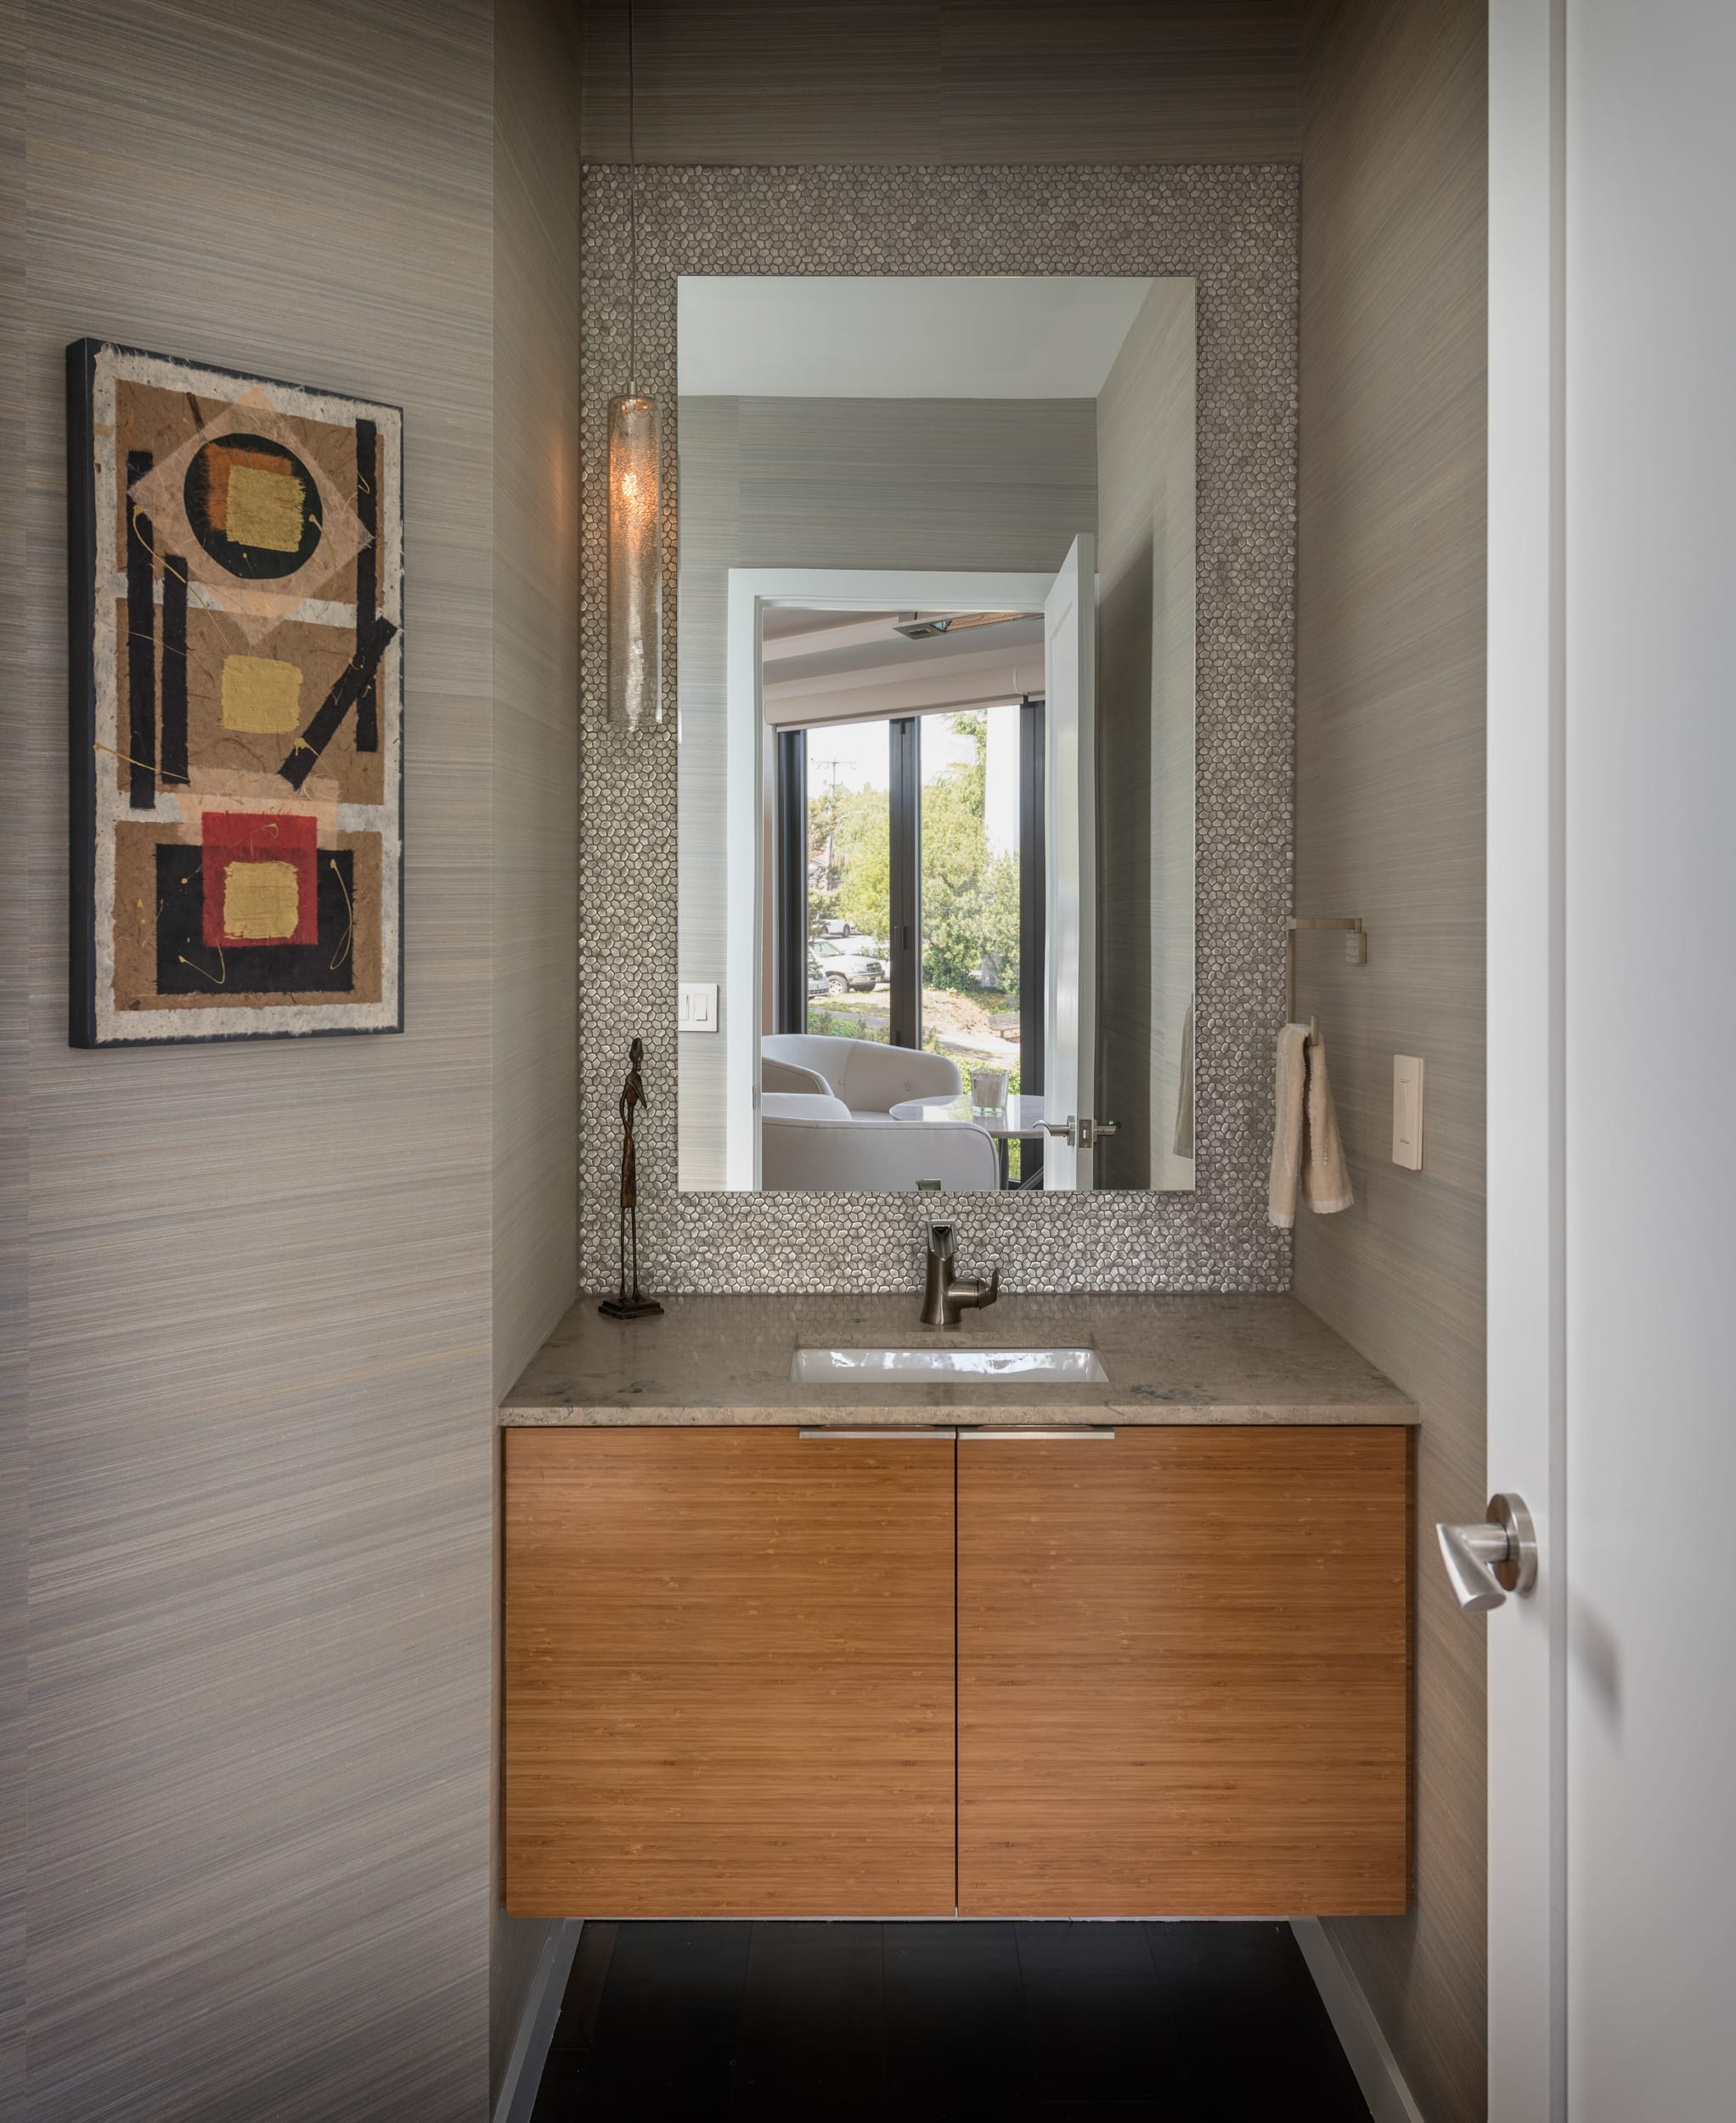 A modern bathroom with a wooden vanity and mirror, suitable for a modern home or crafted by a skilled carpenter.